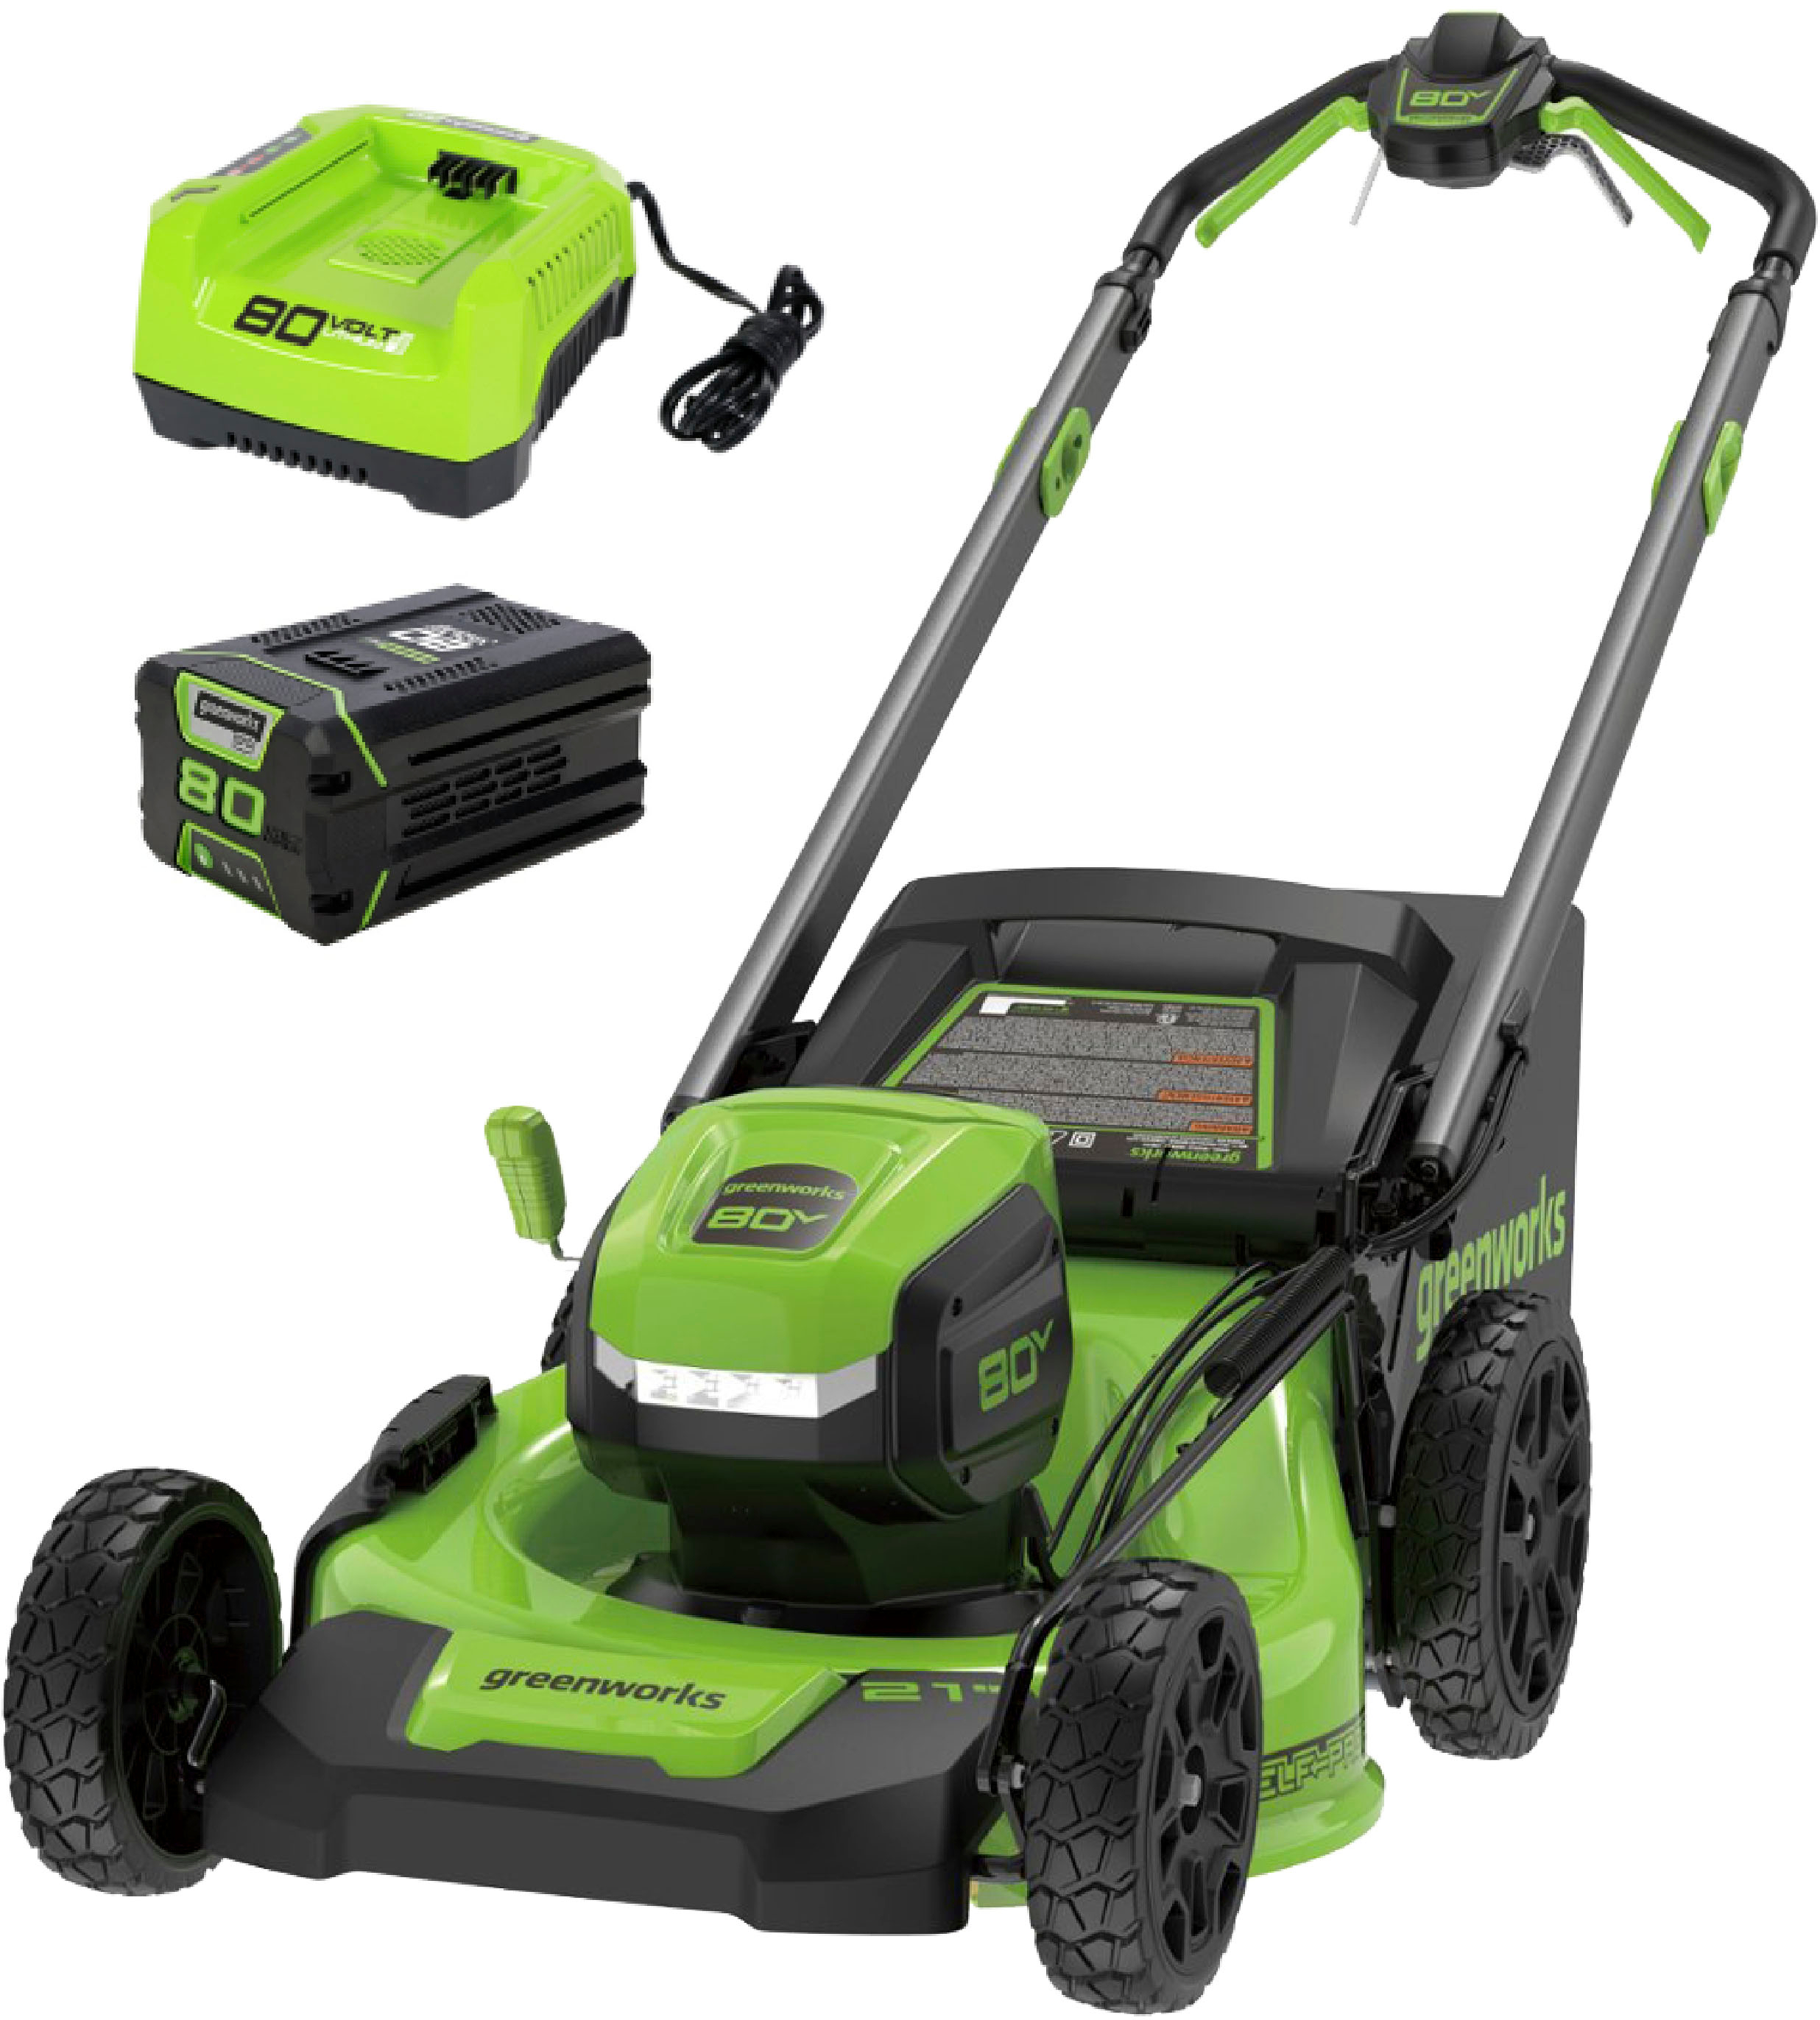 Greenworks 80V 21-Inch Self-Propelled Lawn Mower w/ 4.0Ah Battery + 2Ah Battery + Charger $400